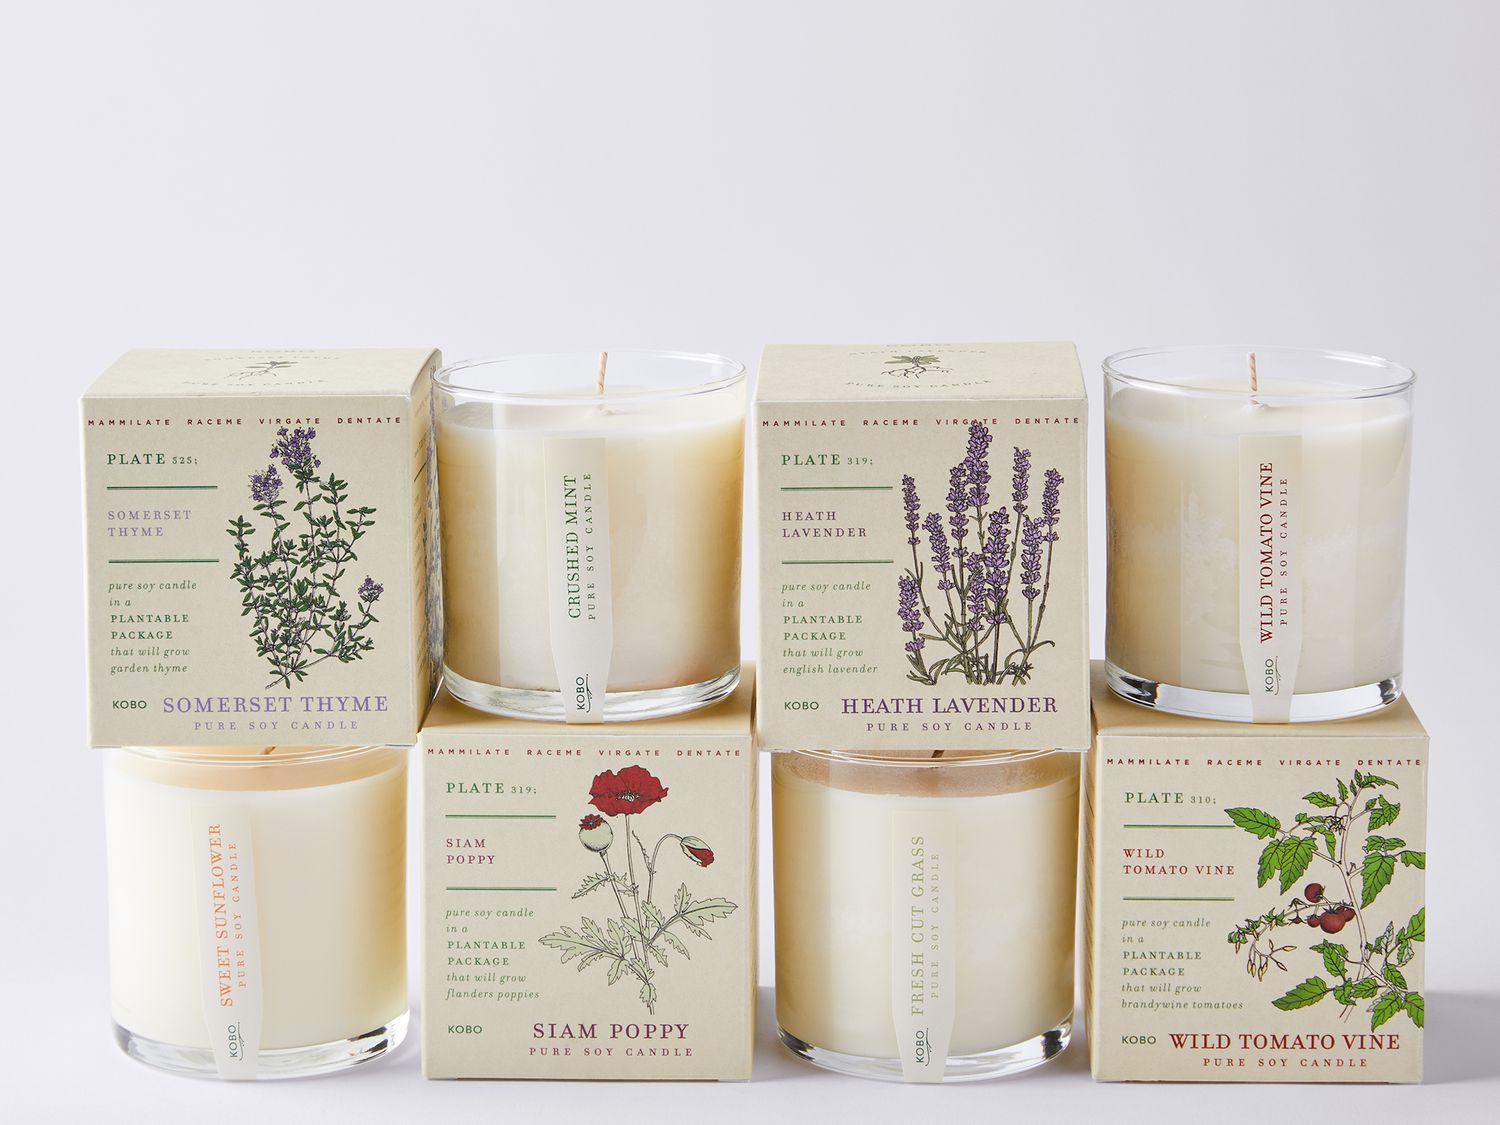 KOBO Plant the Box Candles, 7 Scents, Hand-Poured Soy Wax on Food52